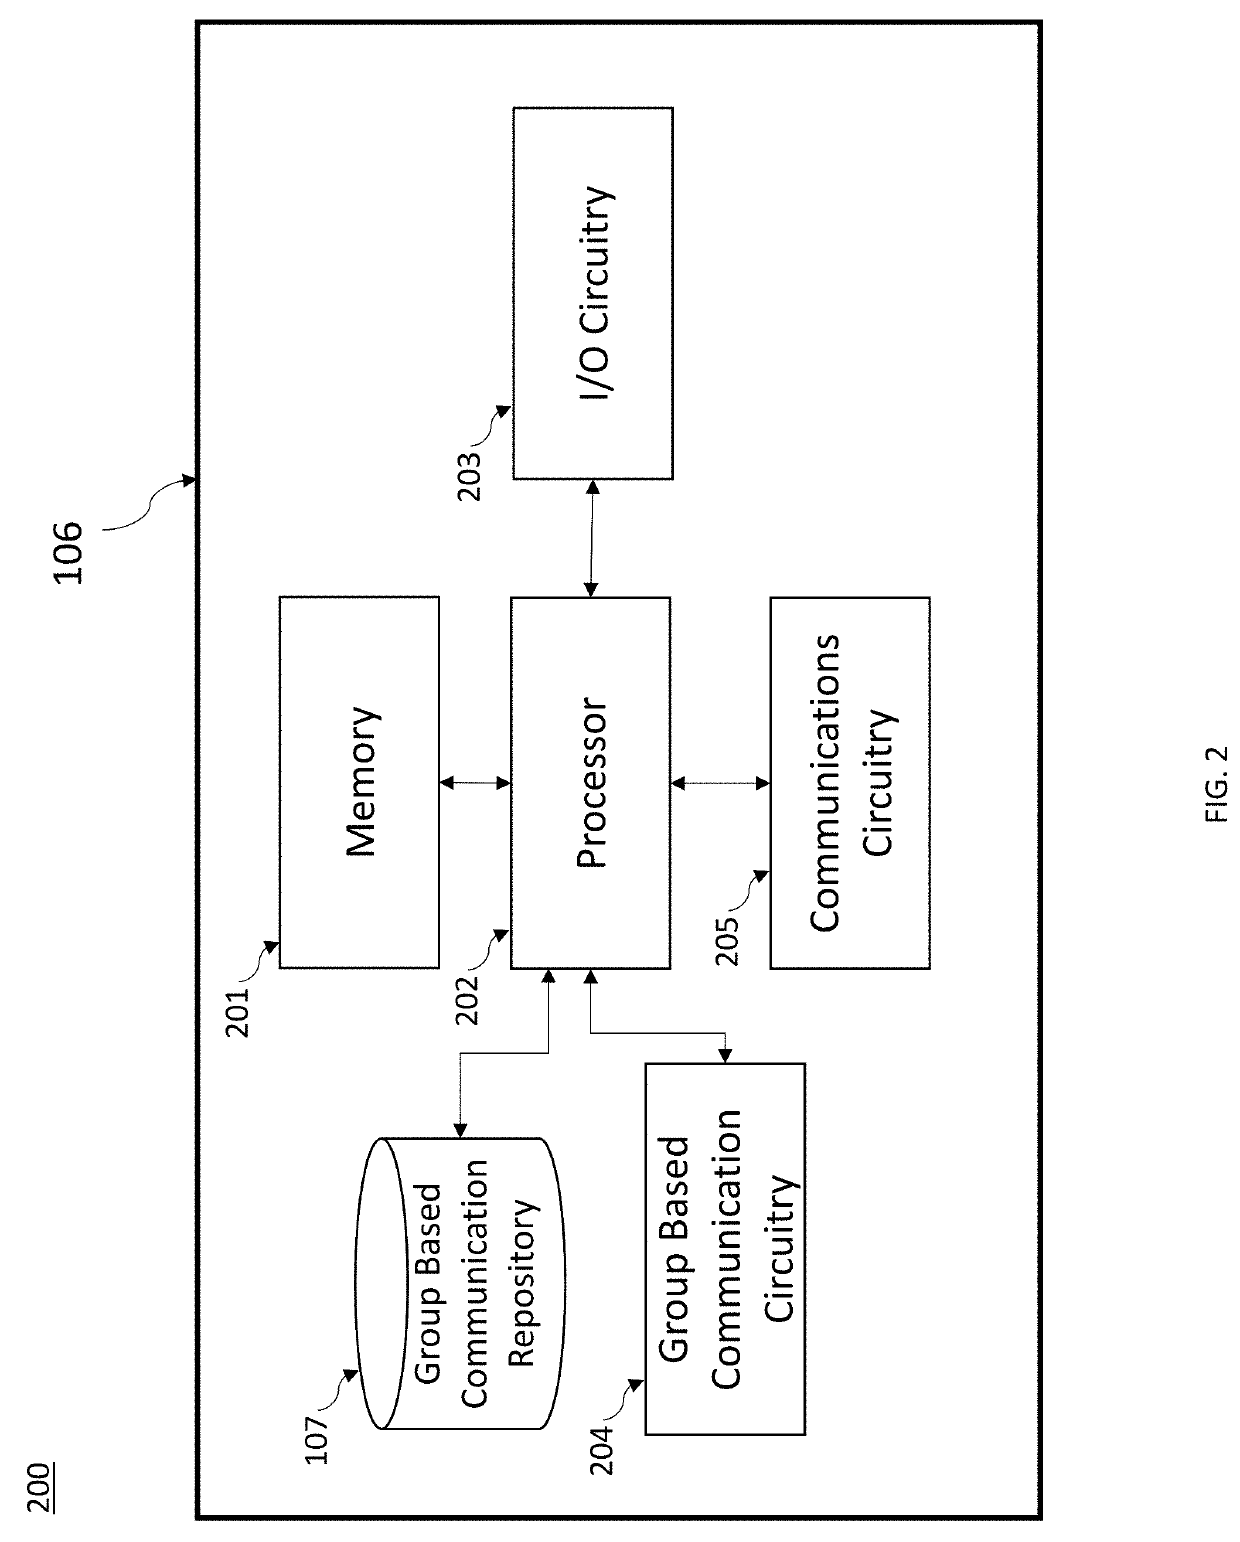 Method, apparatus, and computer program product for selectively granting permissions to group-based objects in a group-based communication system